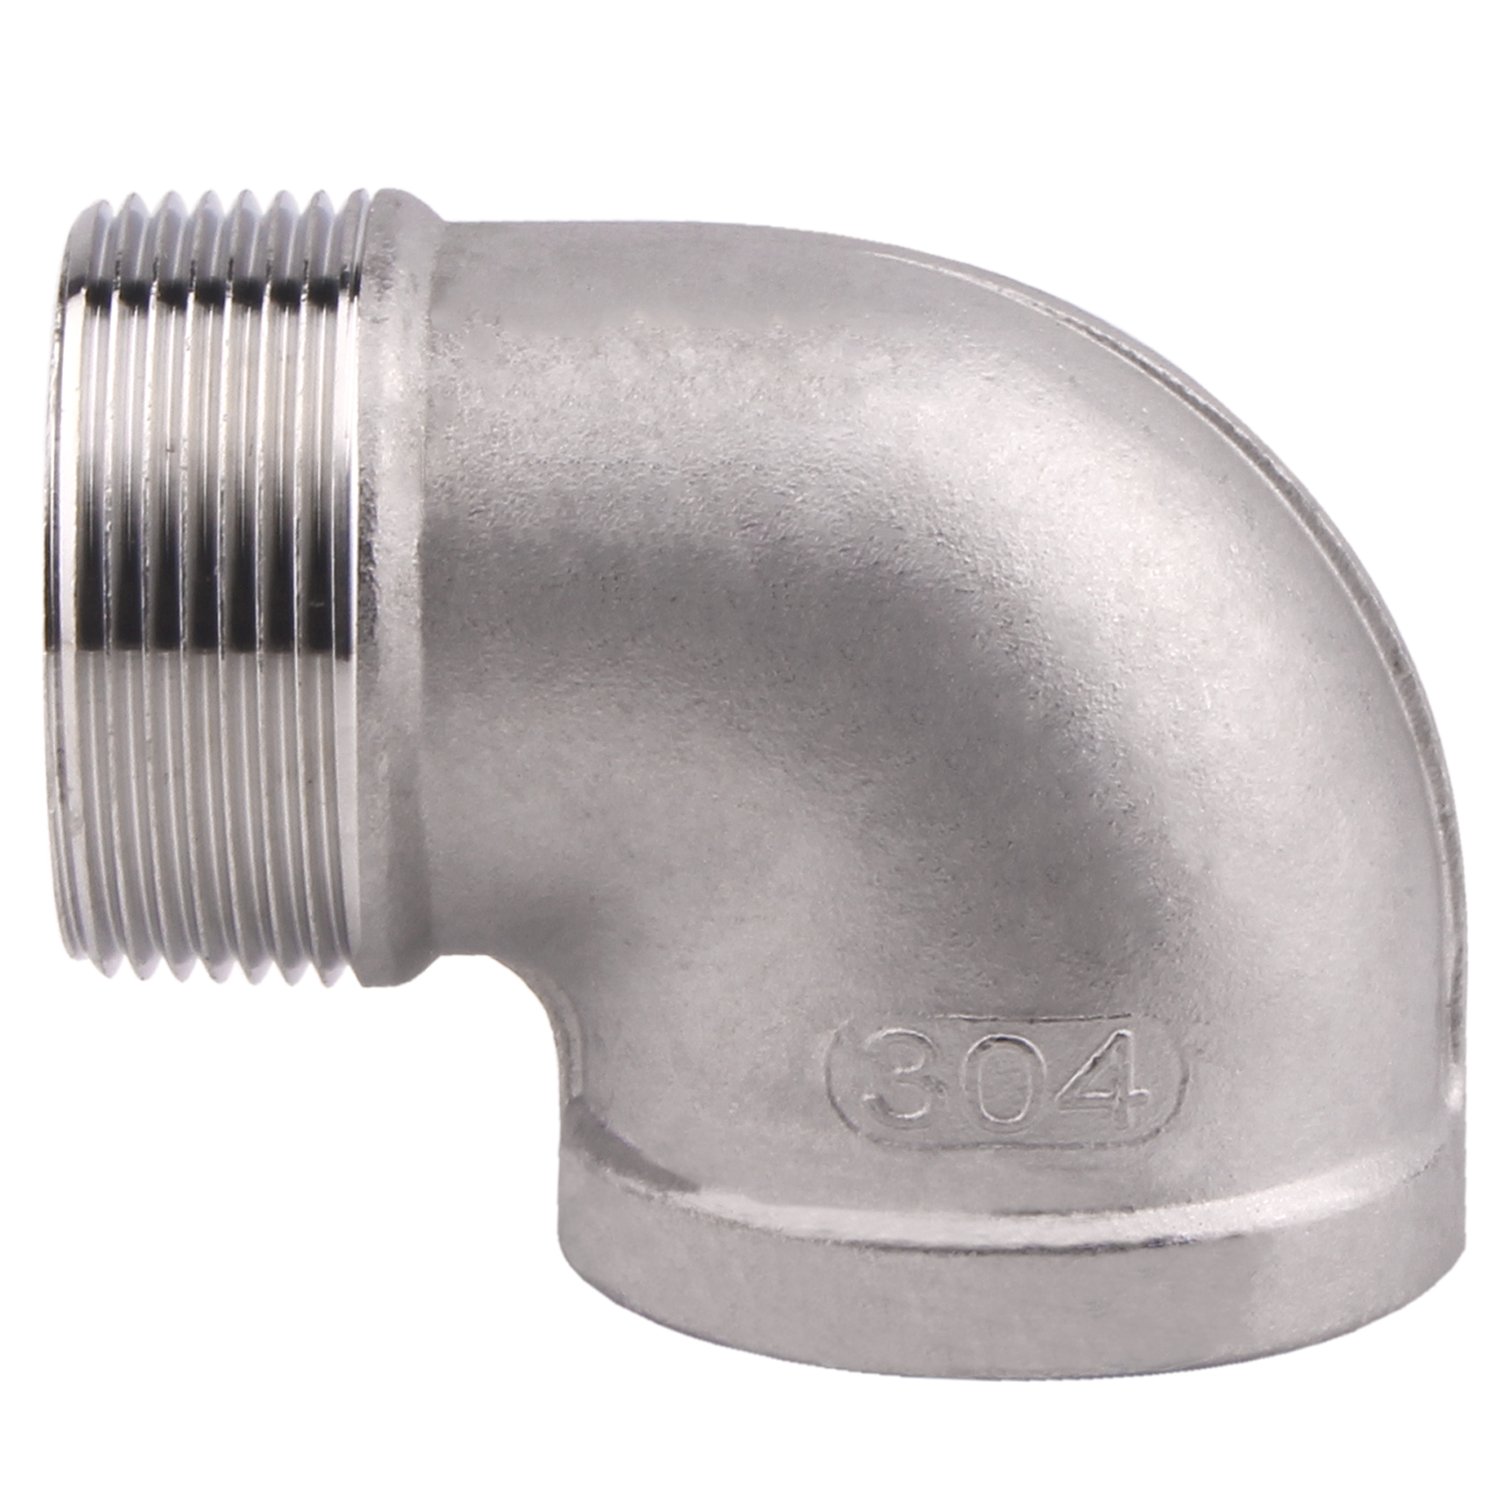 OEM Foundry Stainless Steel Pump Valve Reducing Elbow Casting Parts